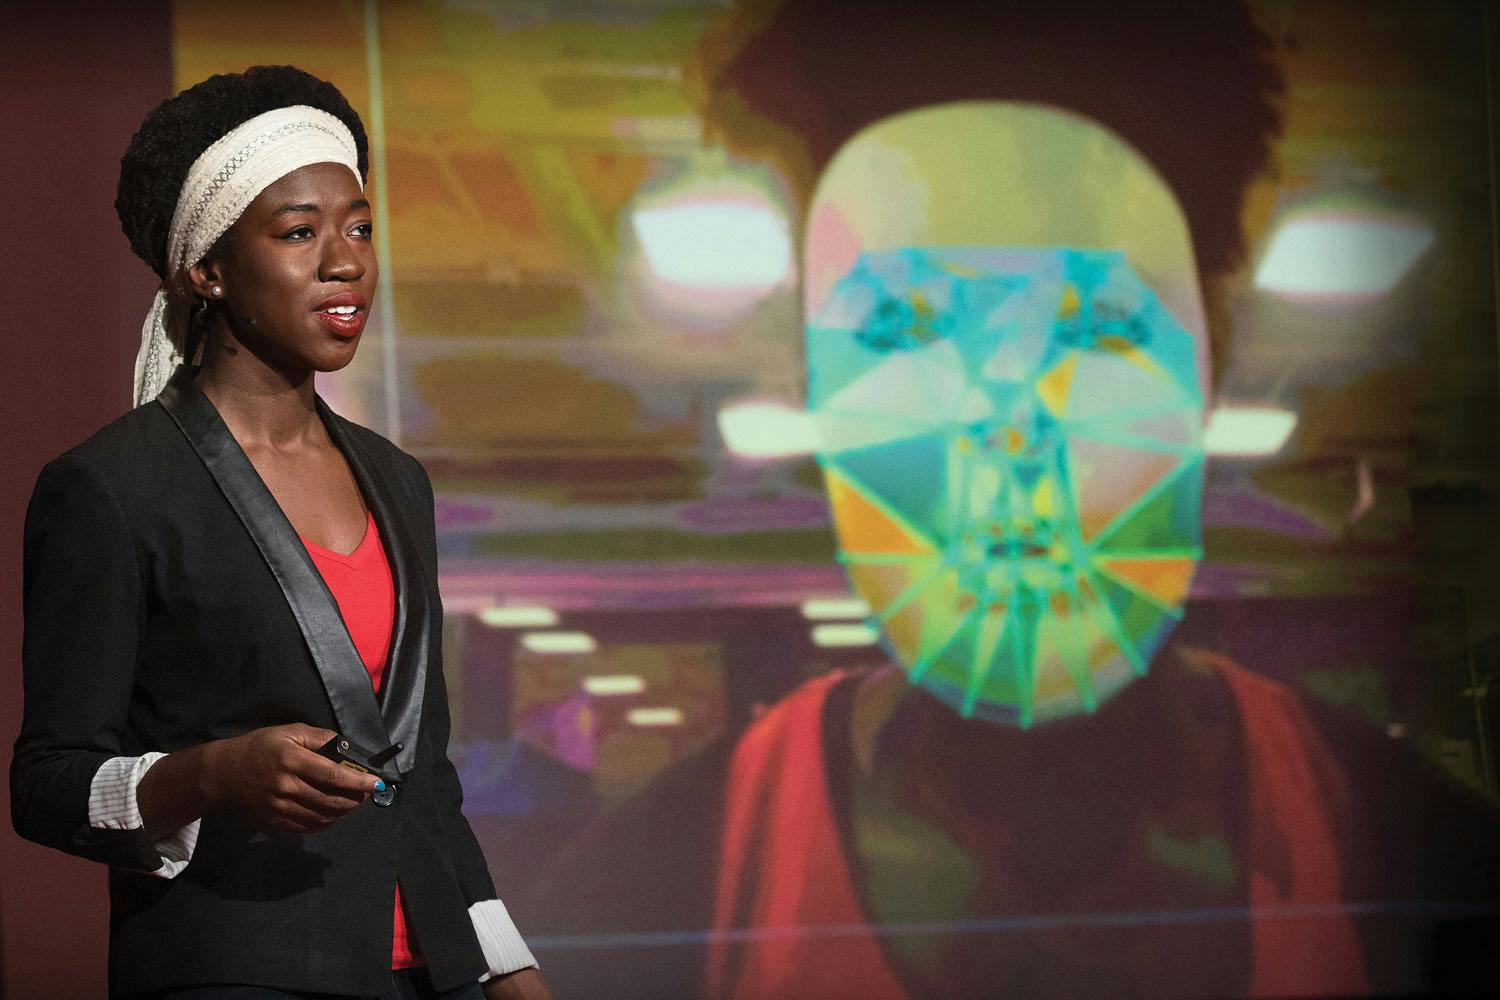 Joy Buolamwini, a dark-skinned woman with short dark hair, stands in front of a demonstration of facial recognition software.